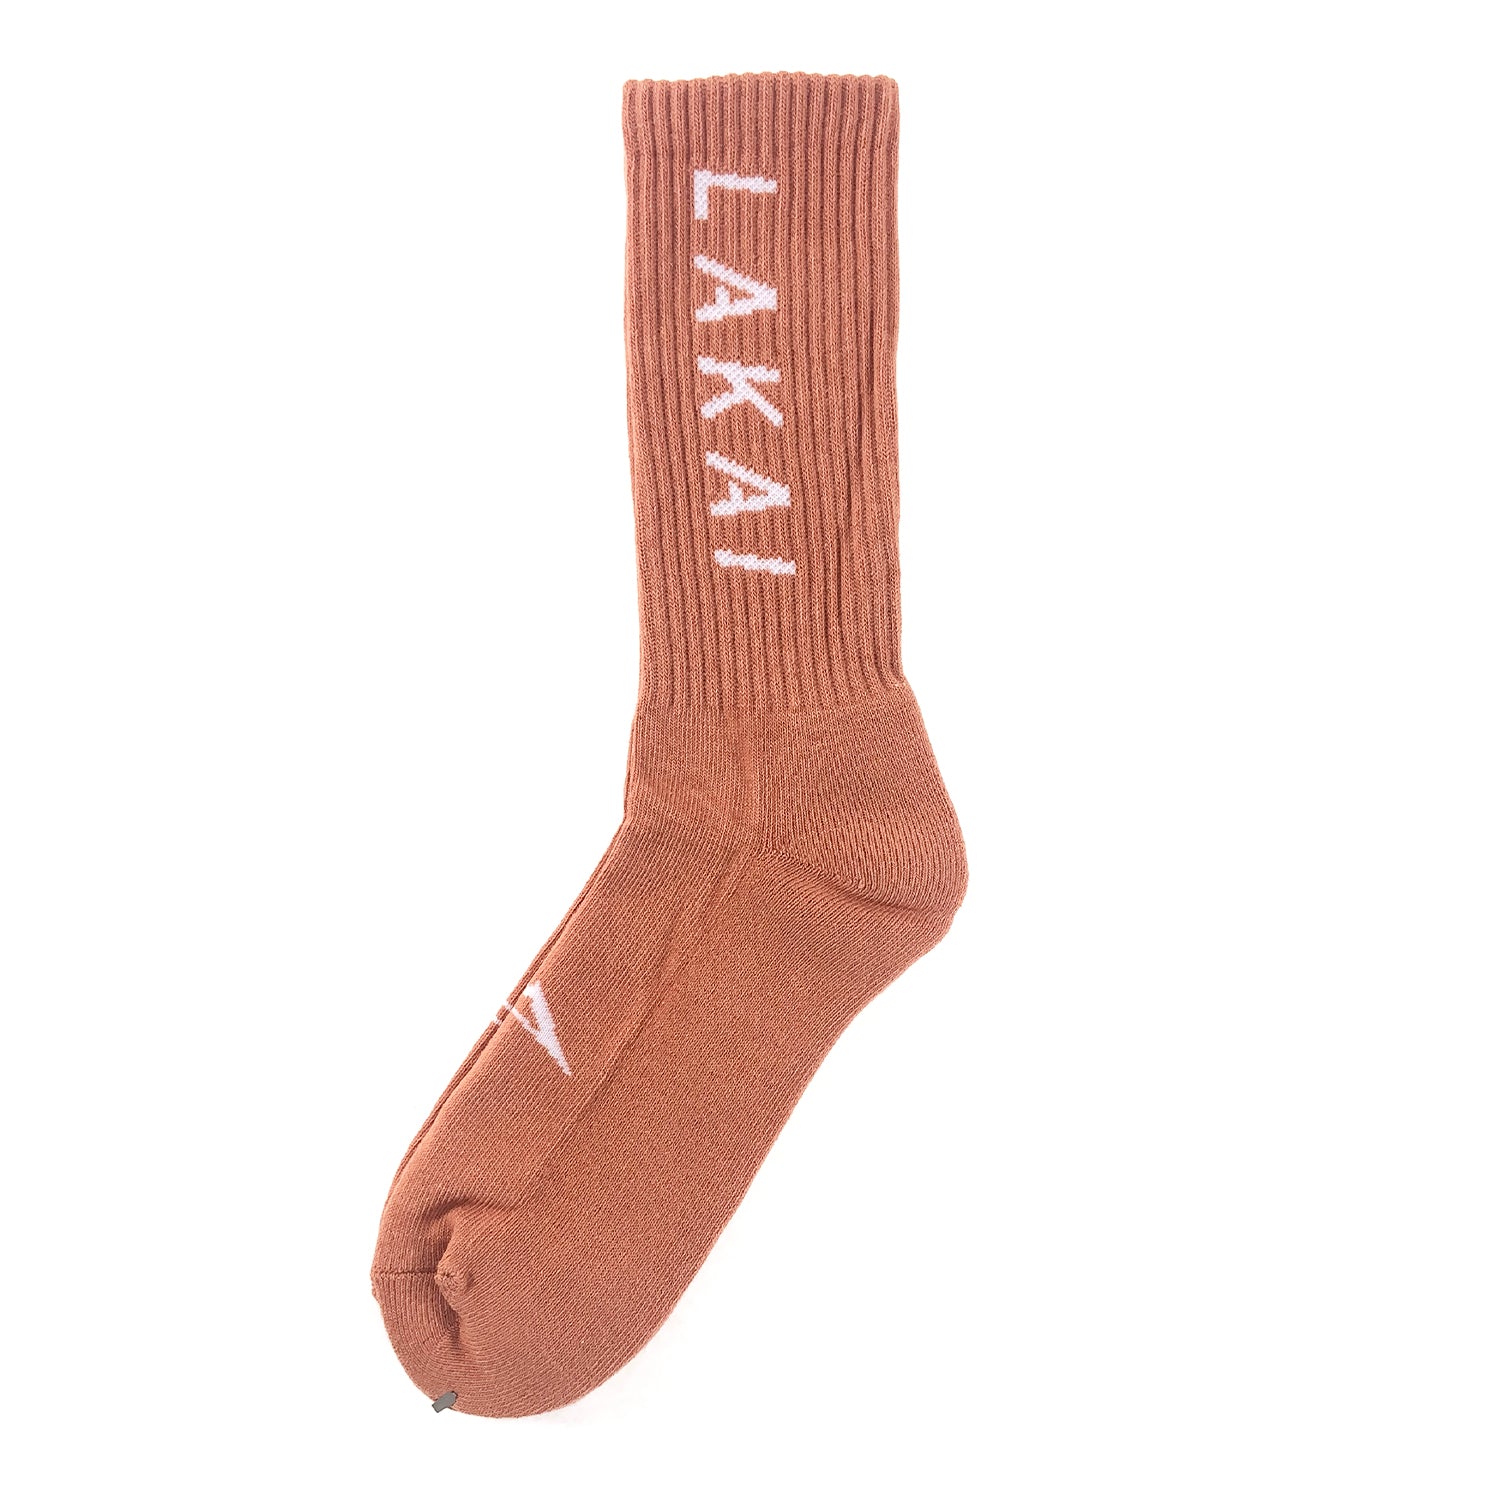 Lakai - Simple Crew Socks - Muted Red - Prime Delux Store